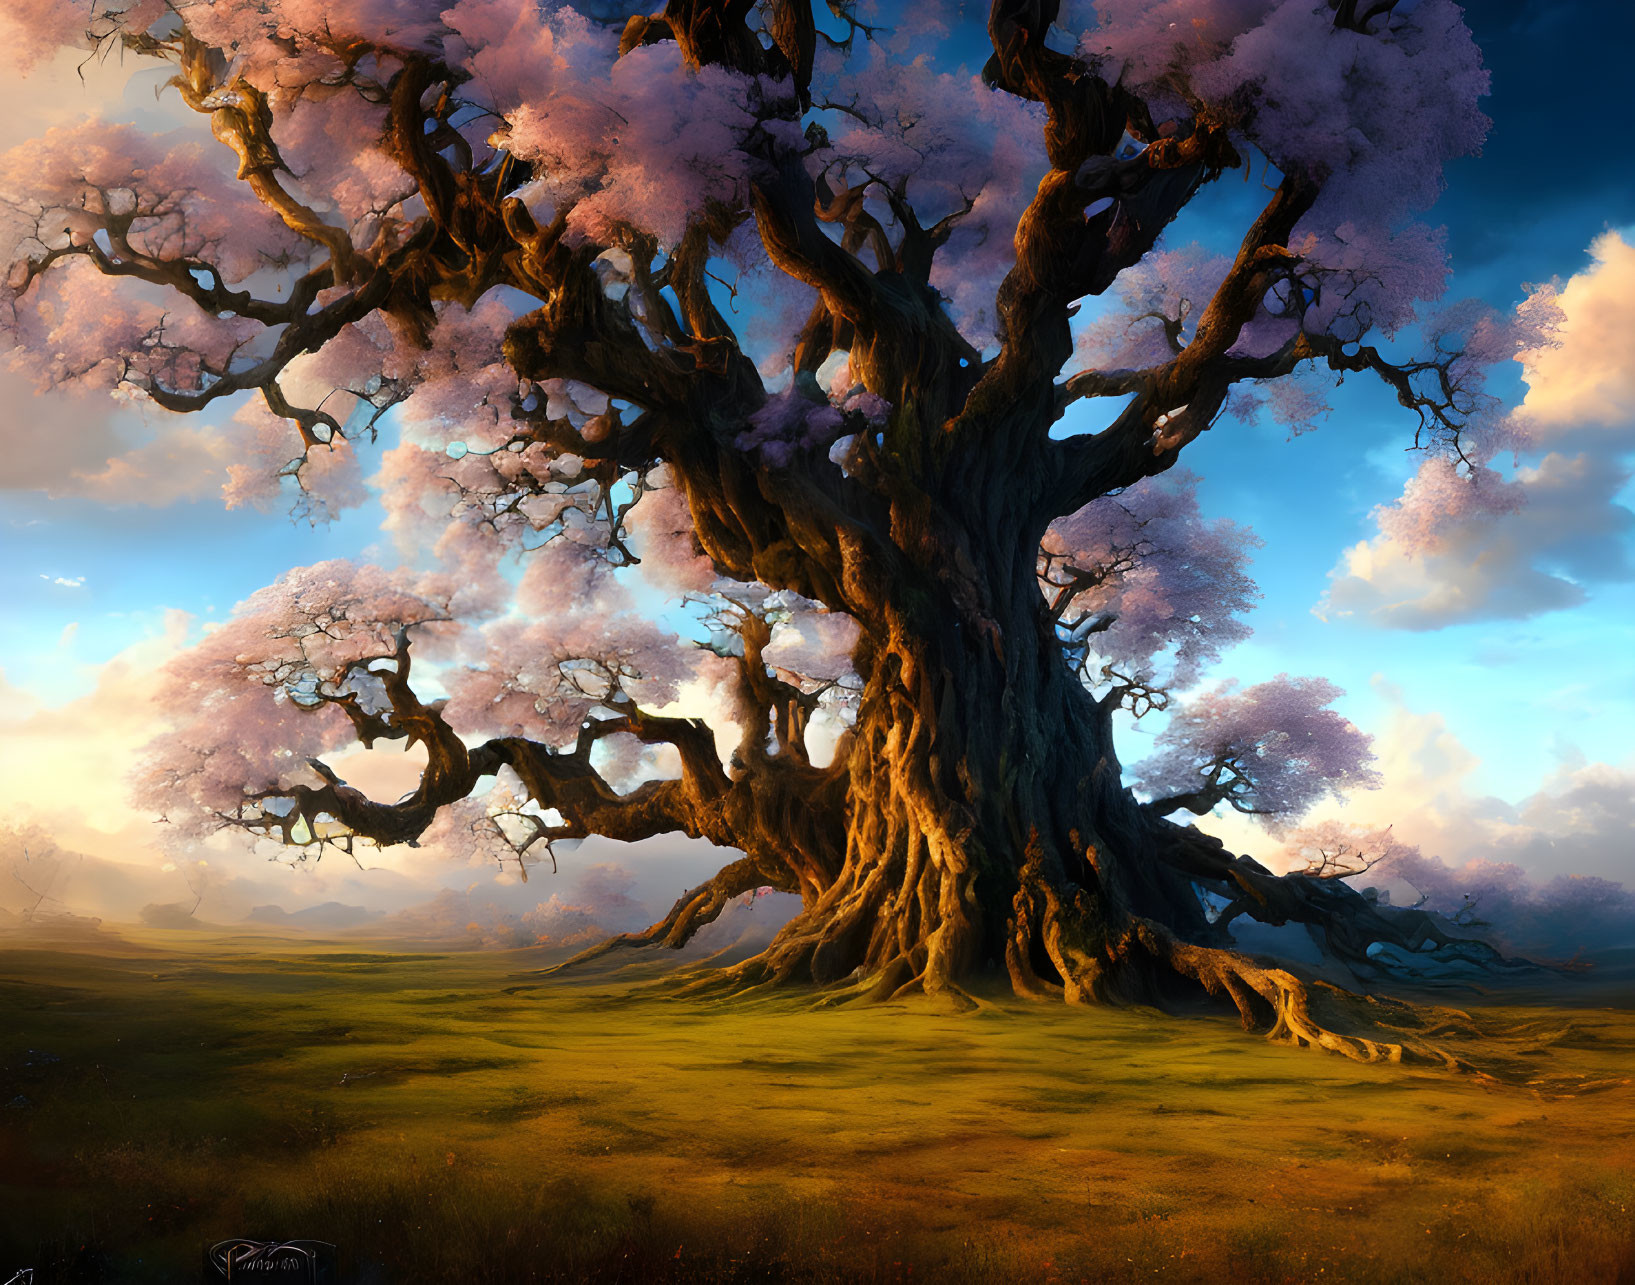 Majestic ancient tree with pink blossoms in serene field